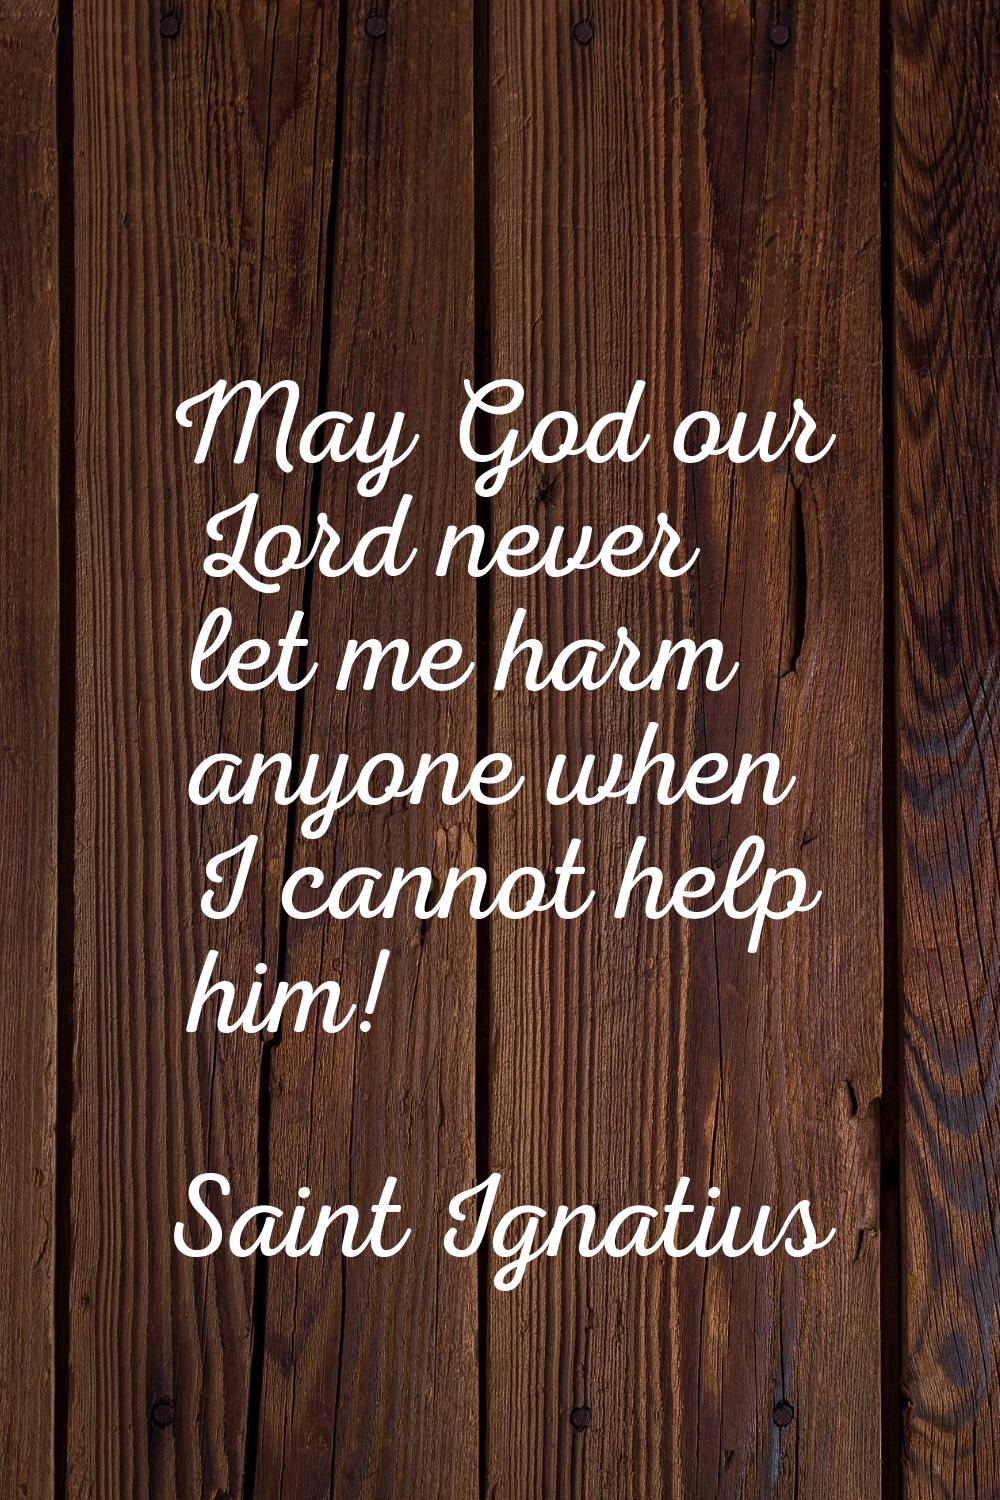 May God our Lord never let me harm anyone when I cannot help him!